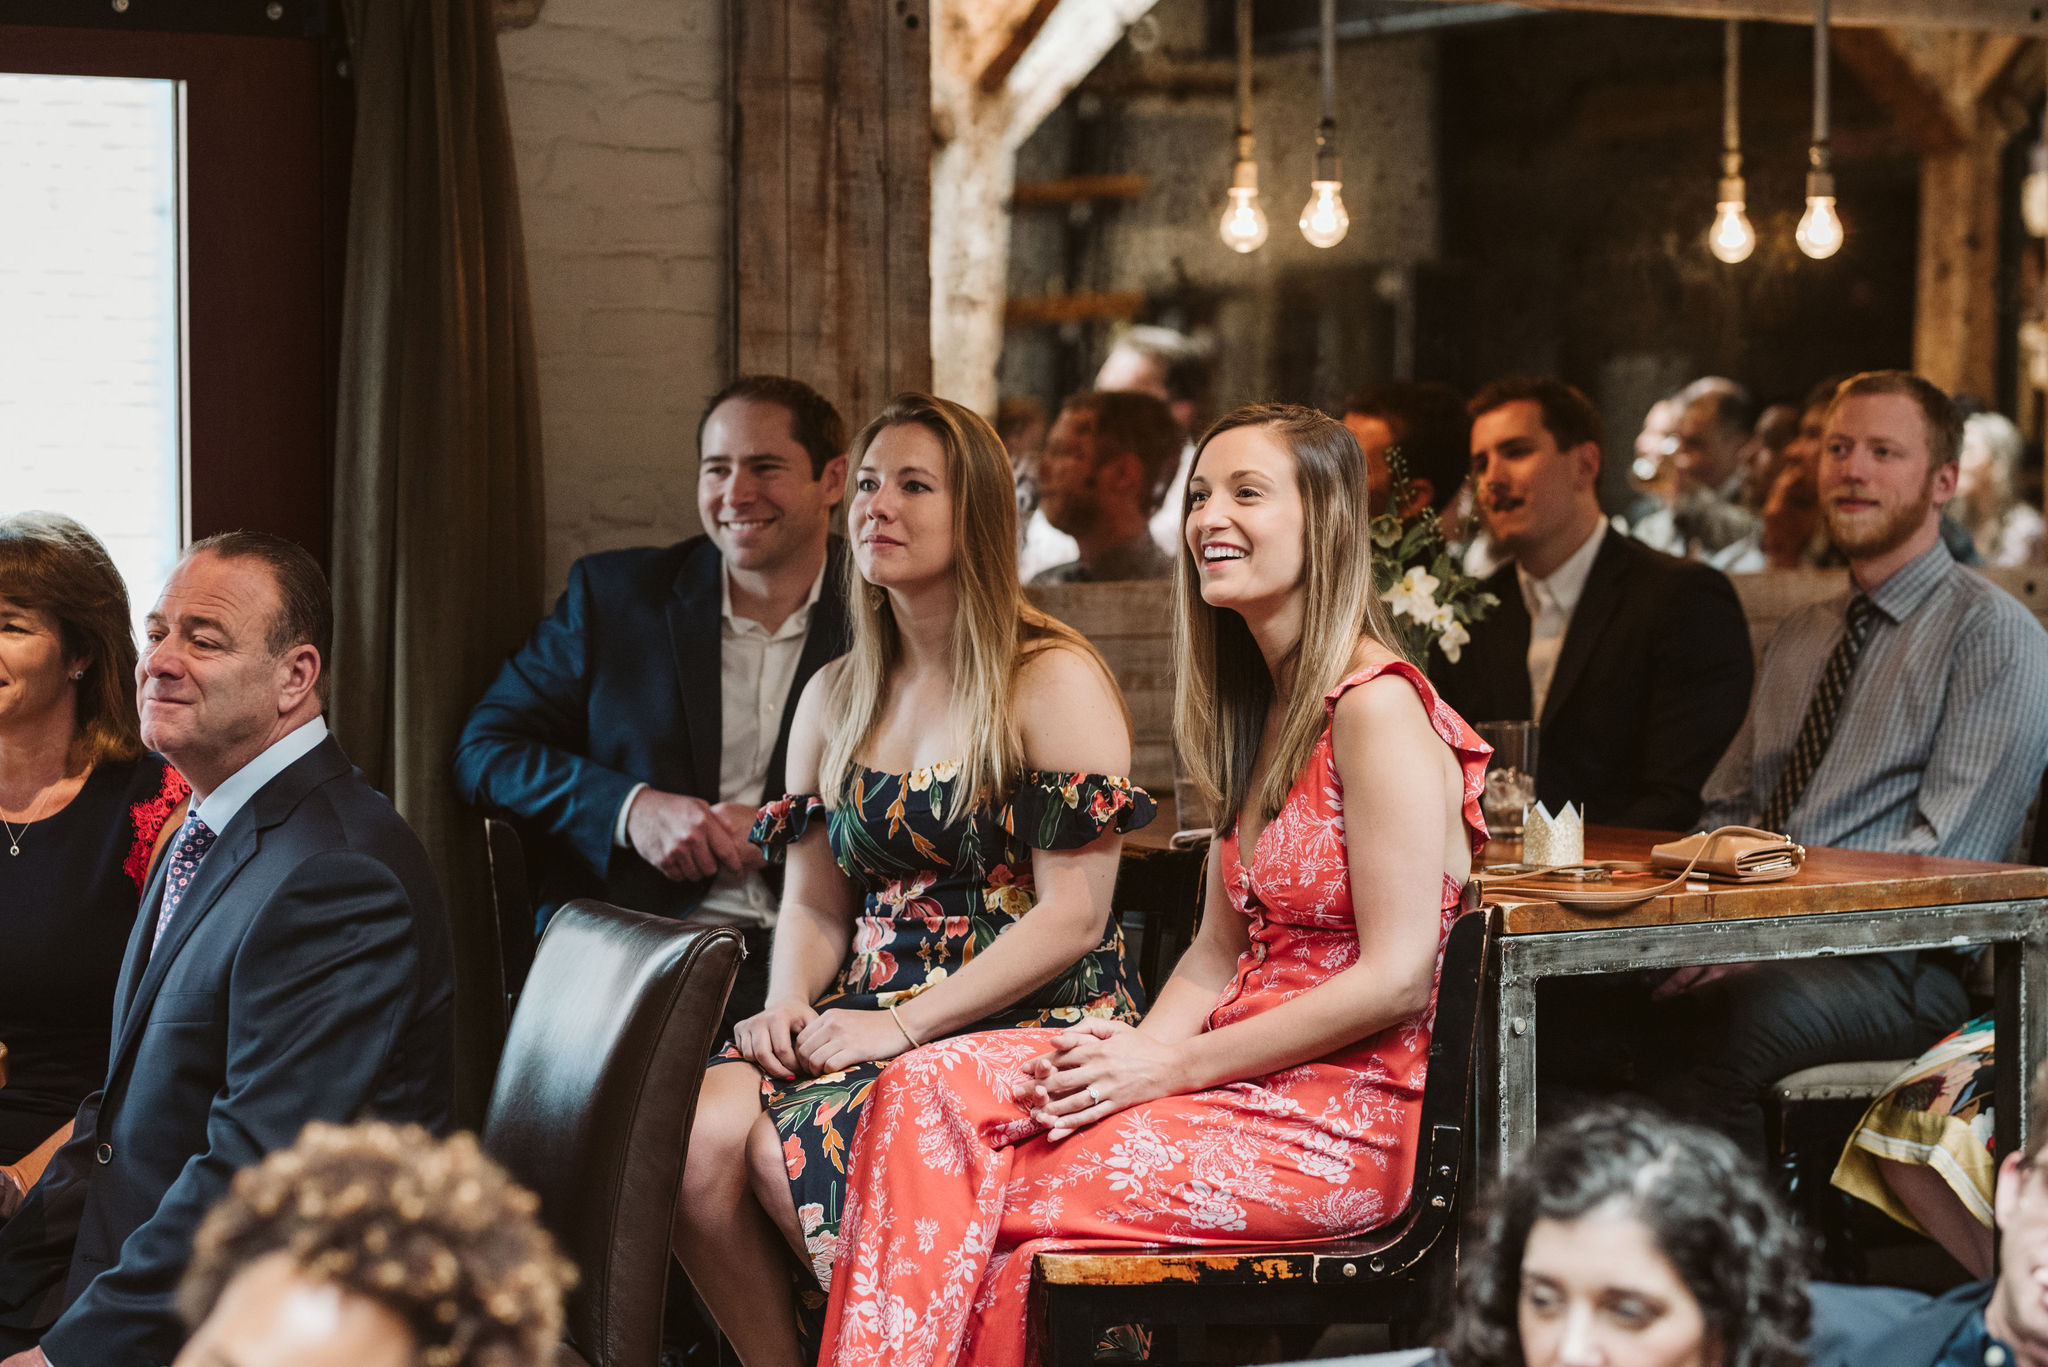  Washington DC, Baltimore Wedding Photographer, Alexandria, Old Town, Jewel Tone, Romantic, Modern, Virtue Feed &amp; Grain, Guests Smiling While Watching Ceremony 